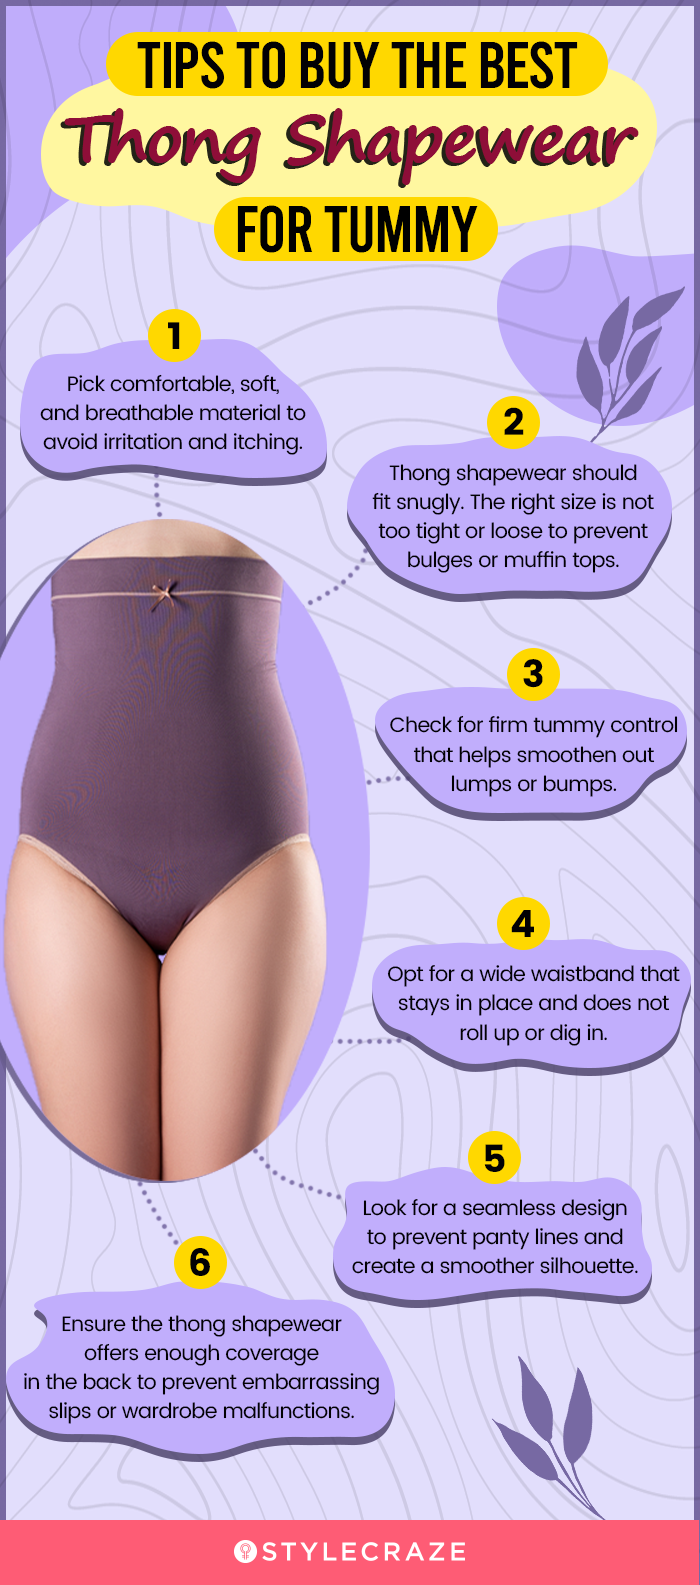 Tips To Buy The Best Thong Shapewear For Tummy (infographic)